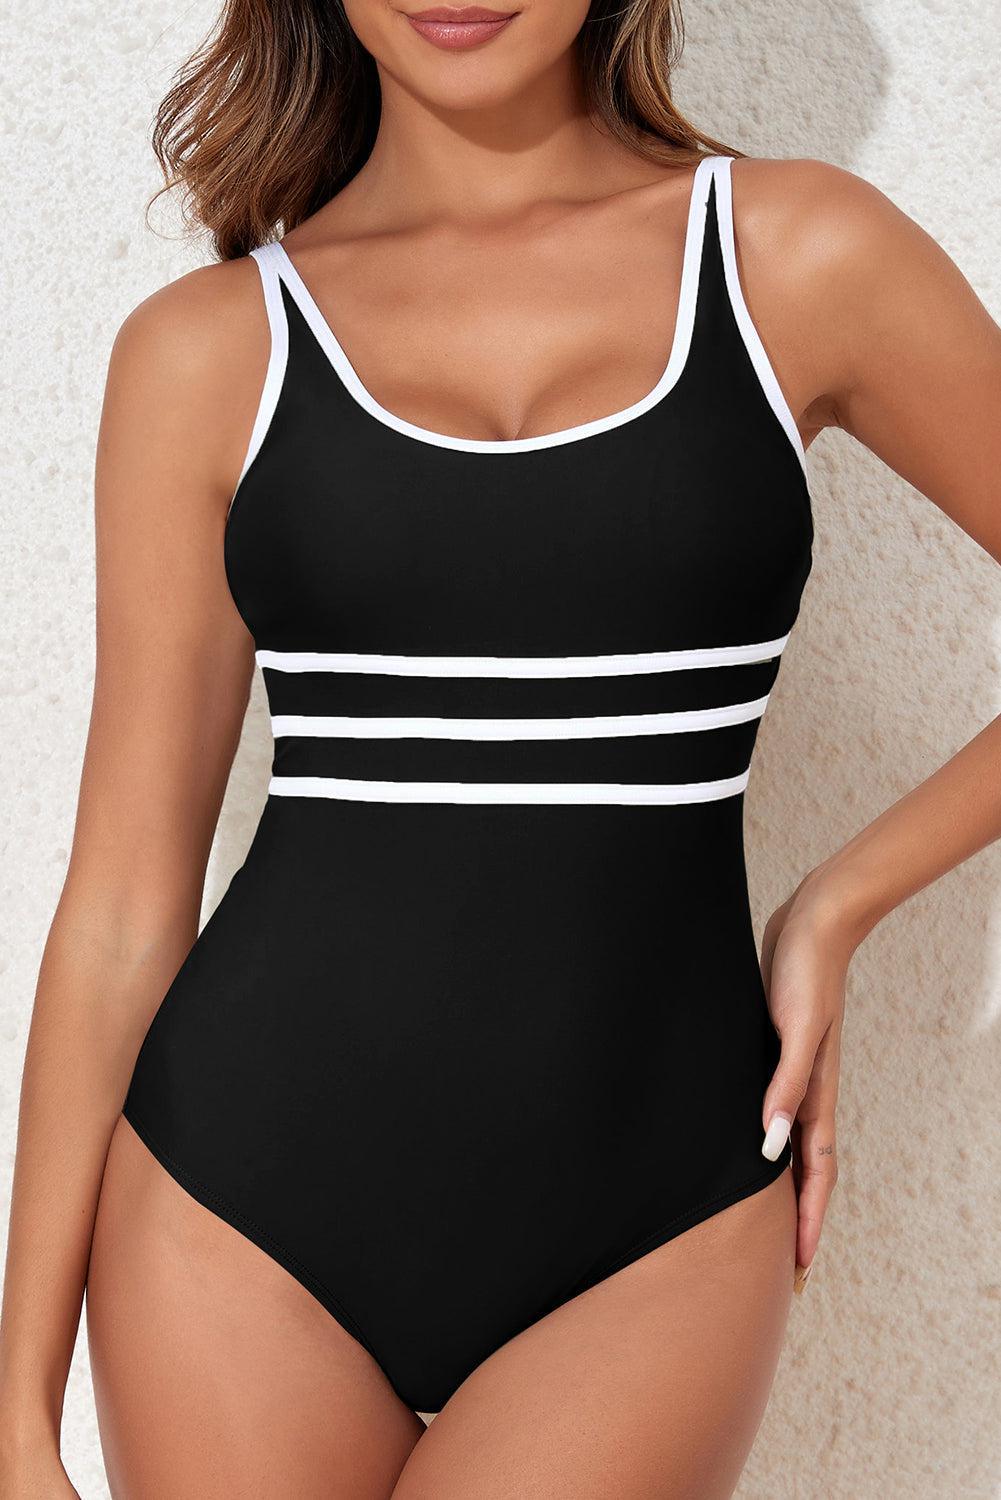 a woman in a black and white one piece swimsuit